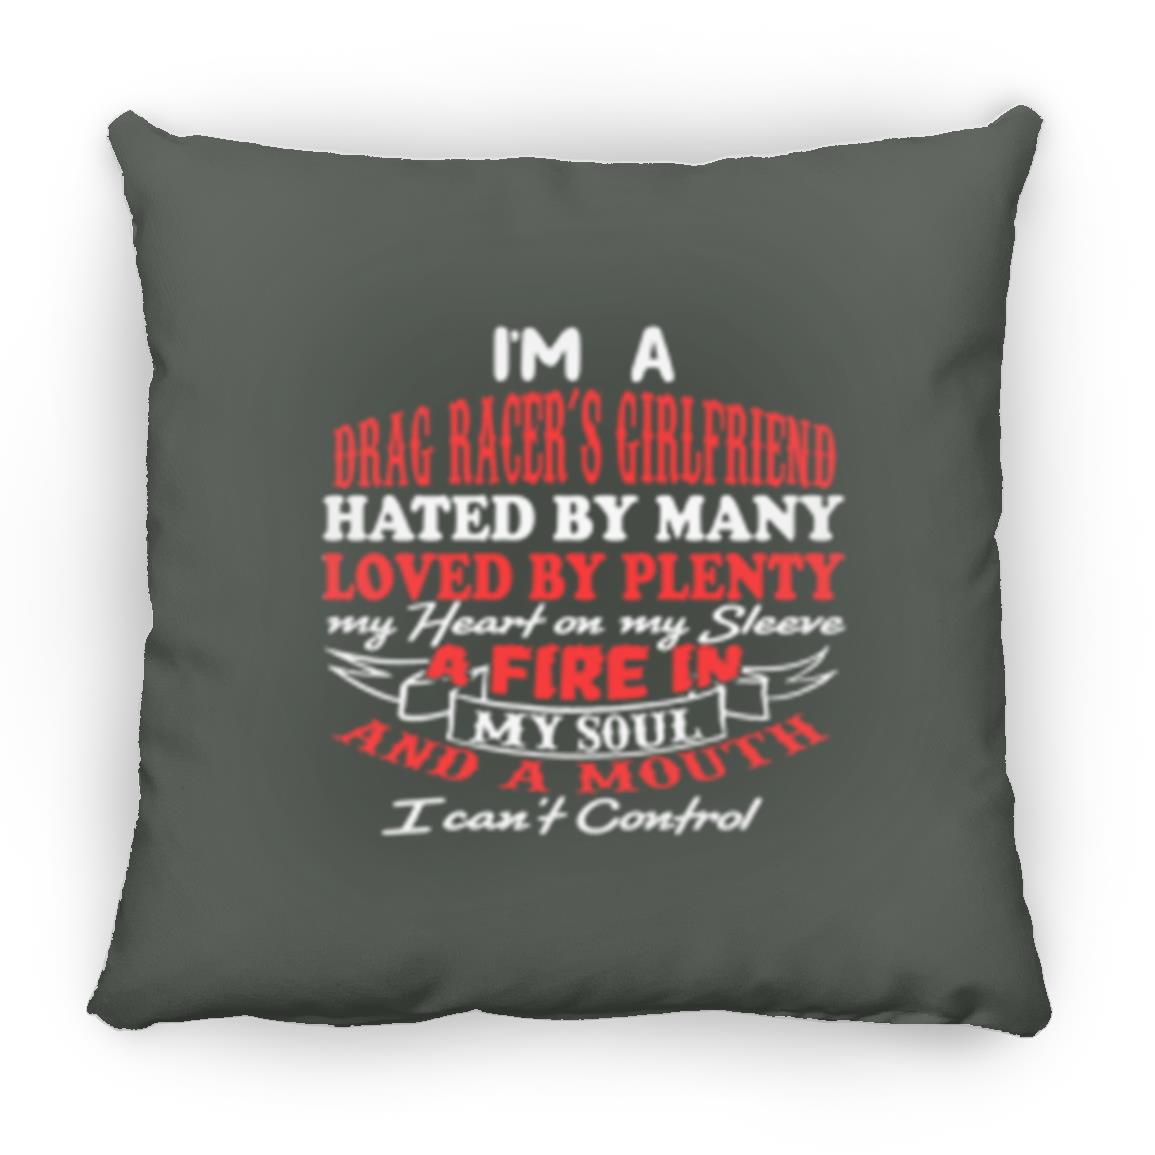 I'm A Drag Racer's Girlfriend Hated By Many Loved By Plenty Large Square Pillow